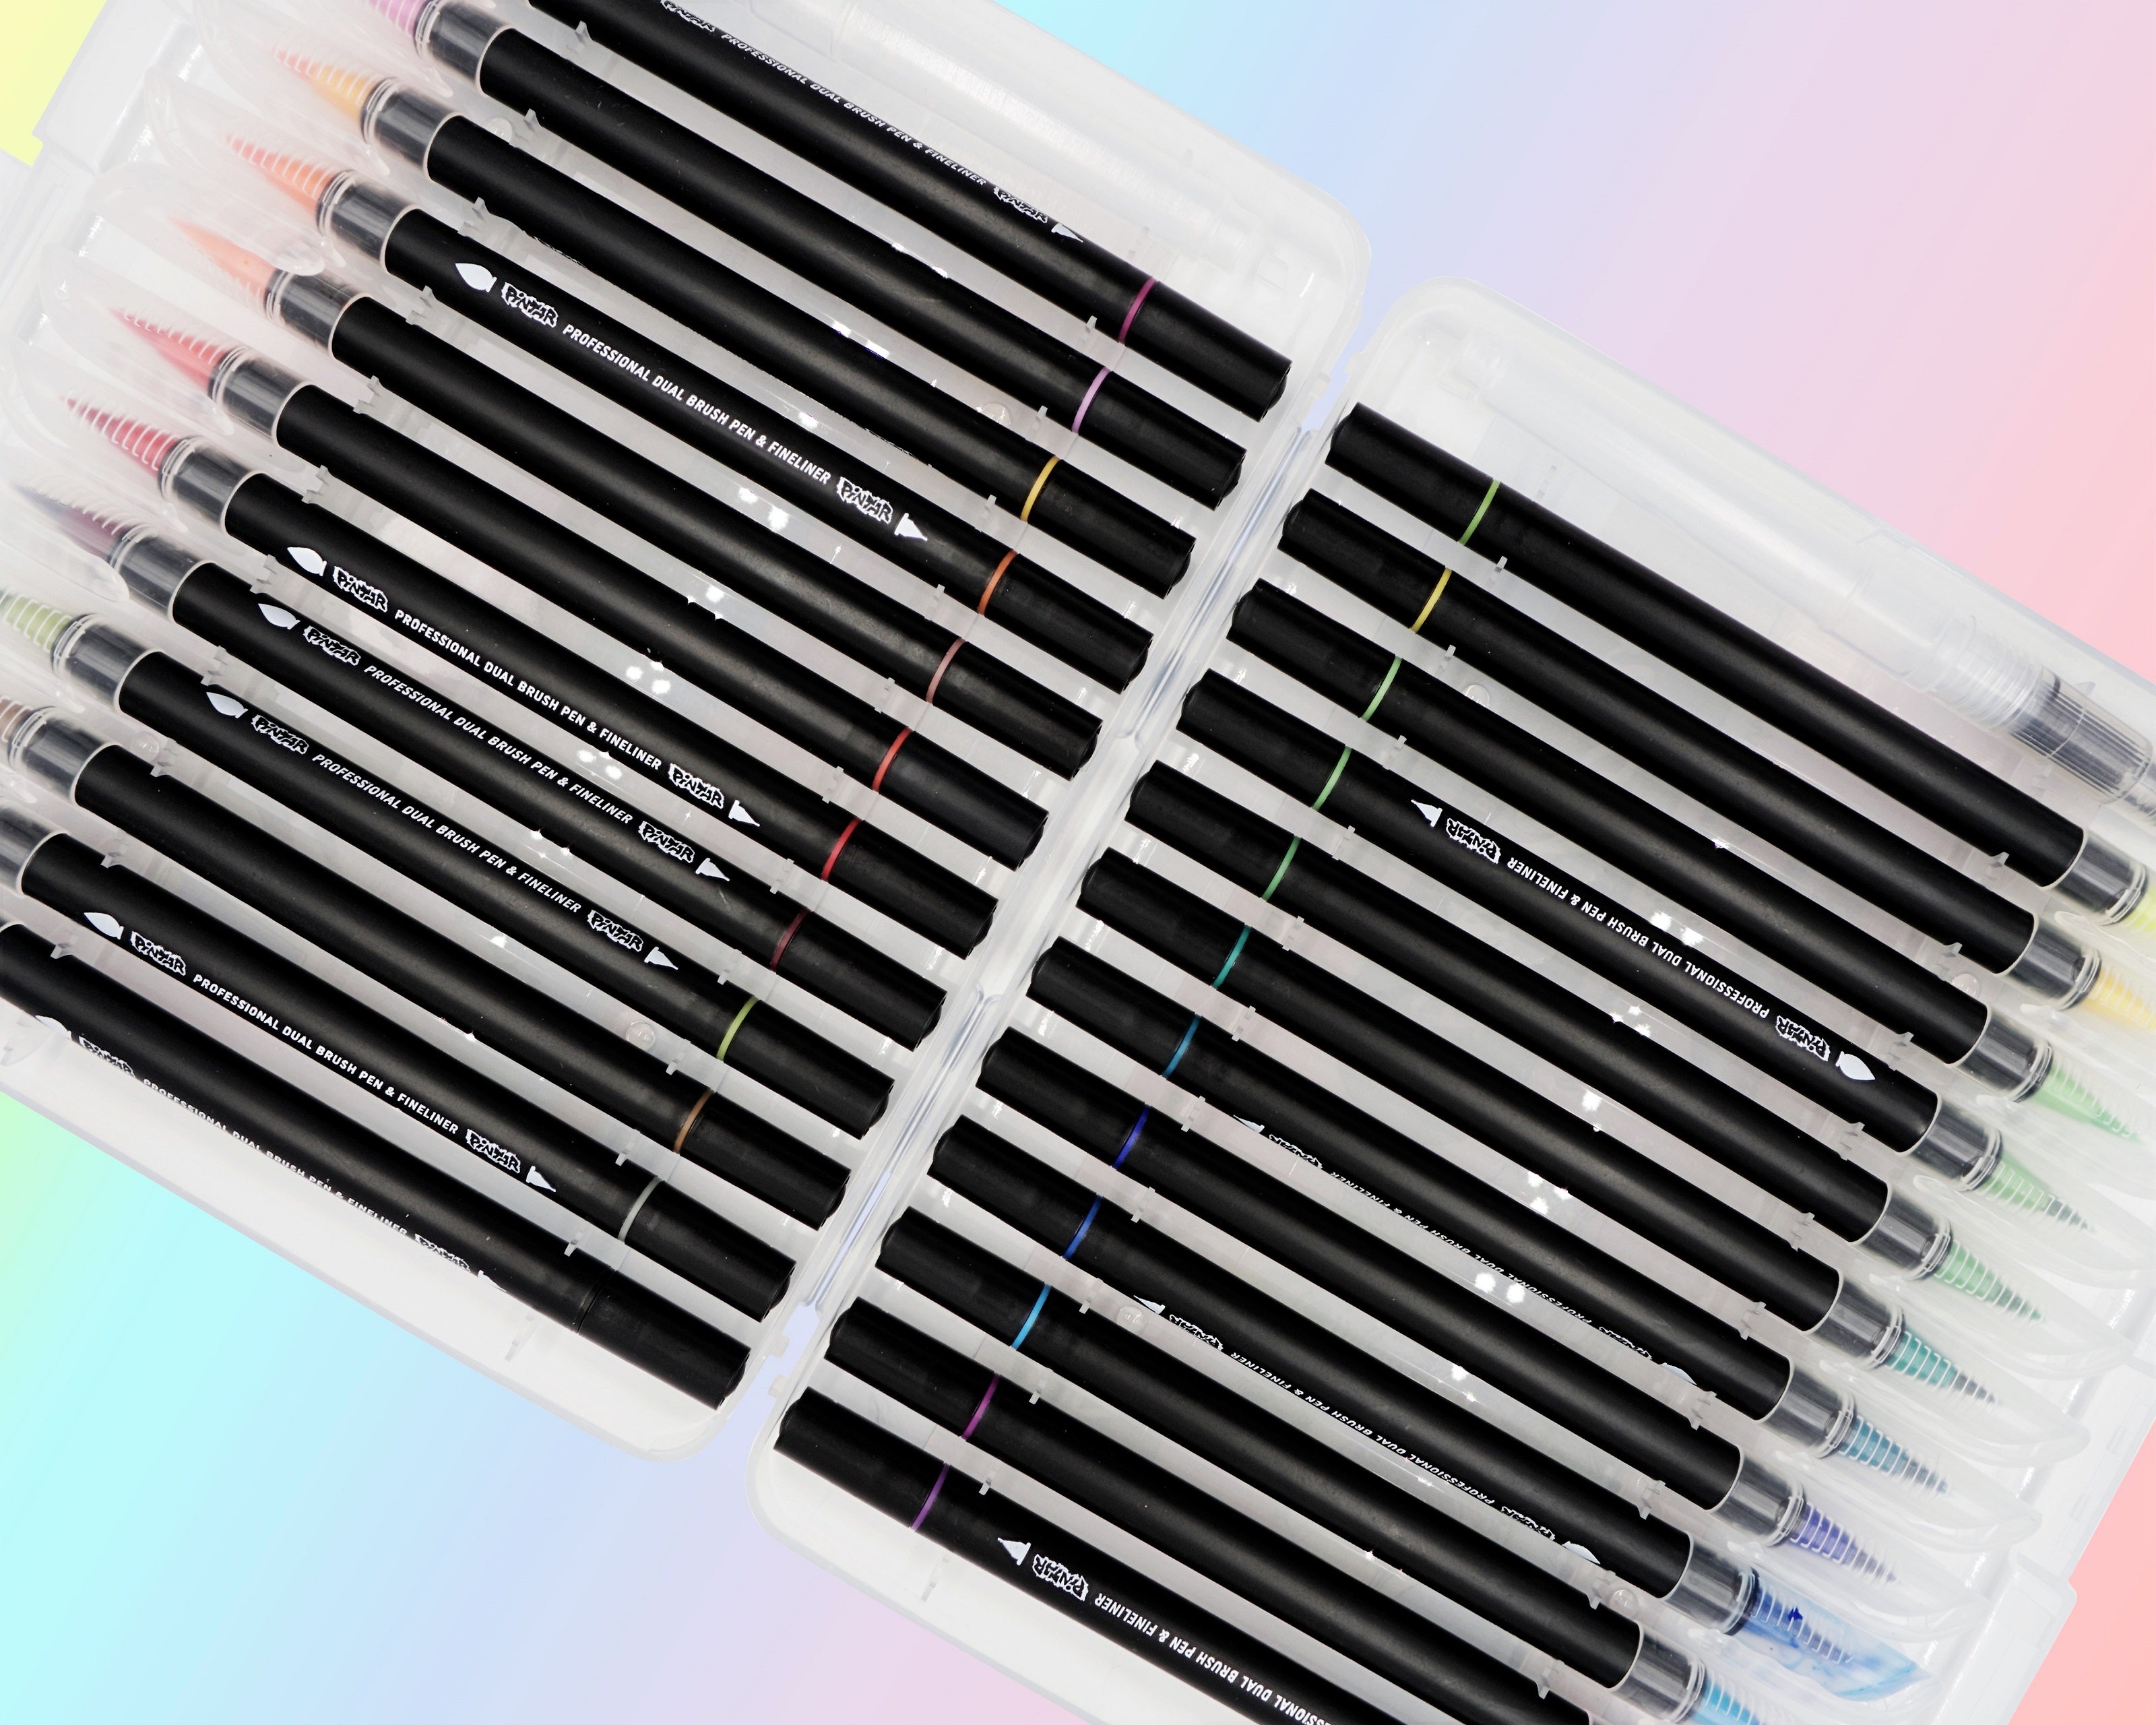 Soucolor Dual Tip Brush Markers Pens, 32 Fine Point and Brush